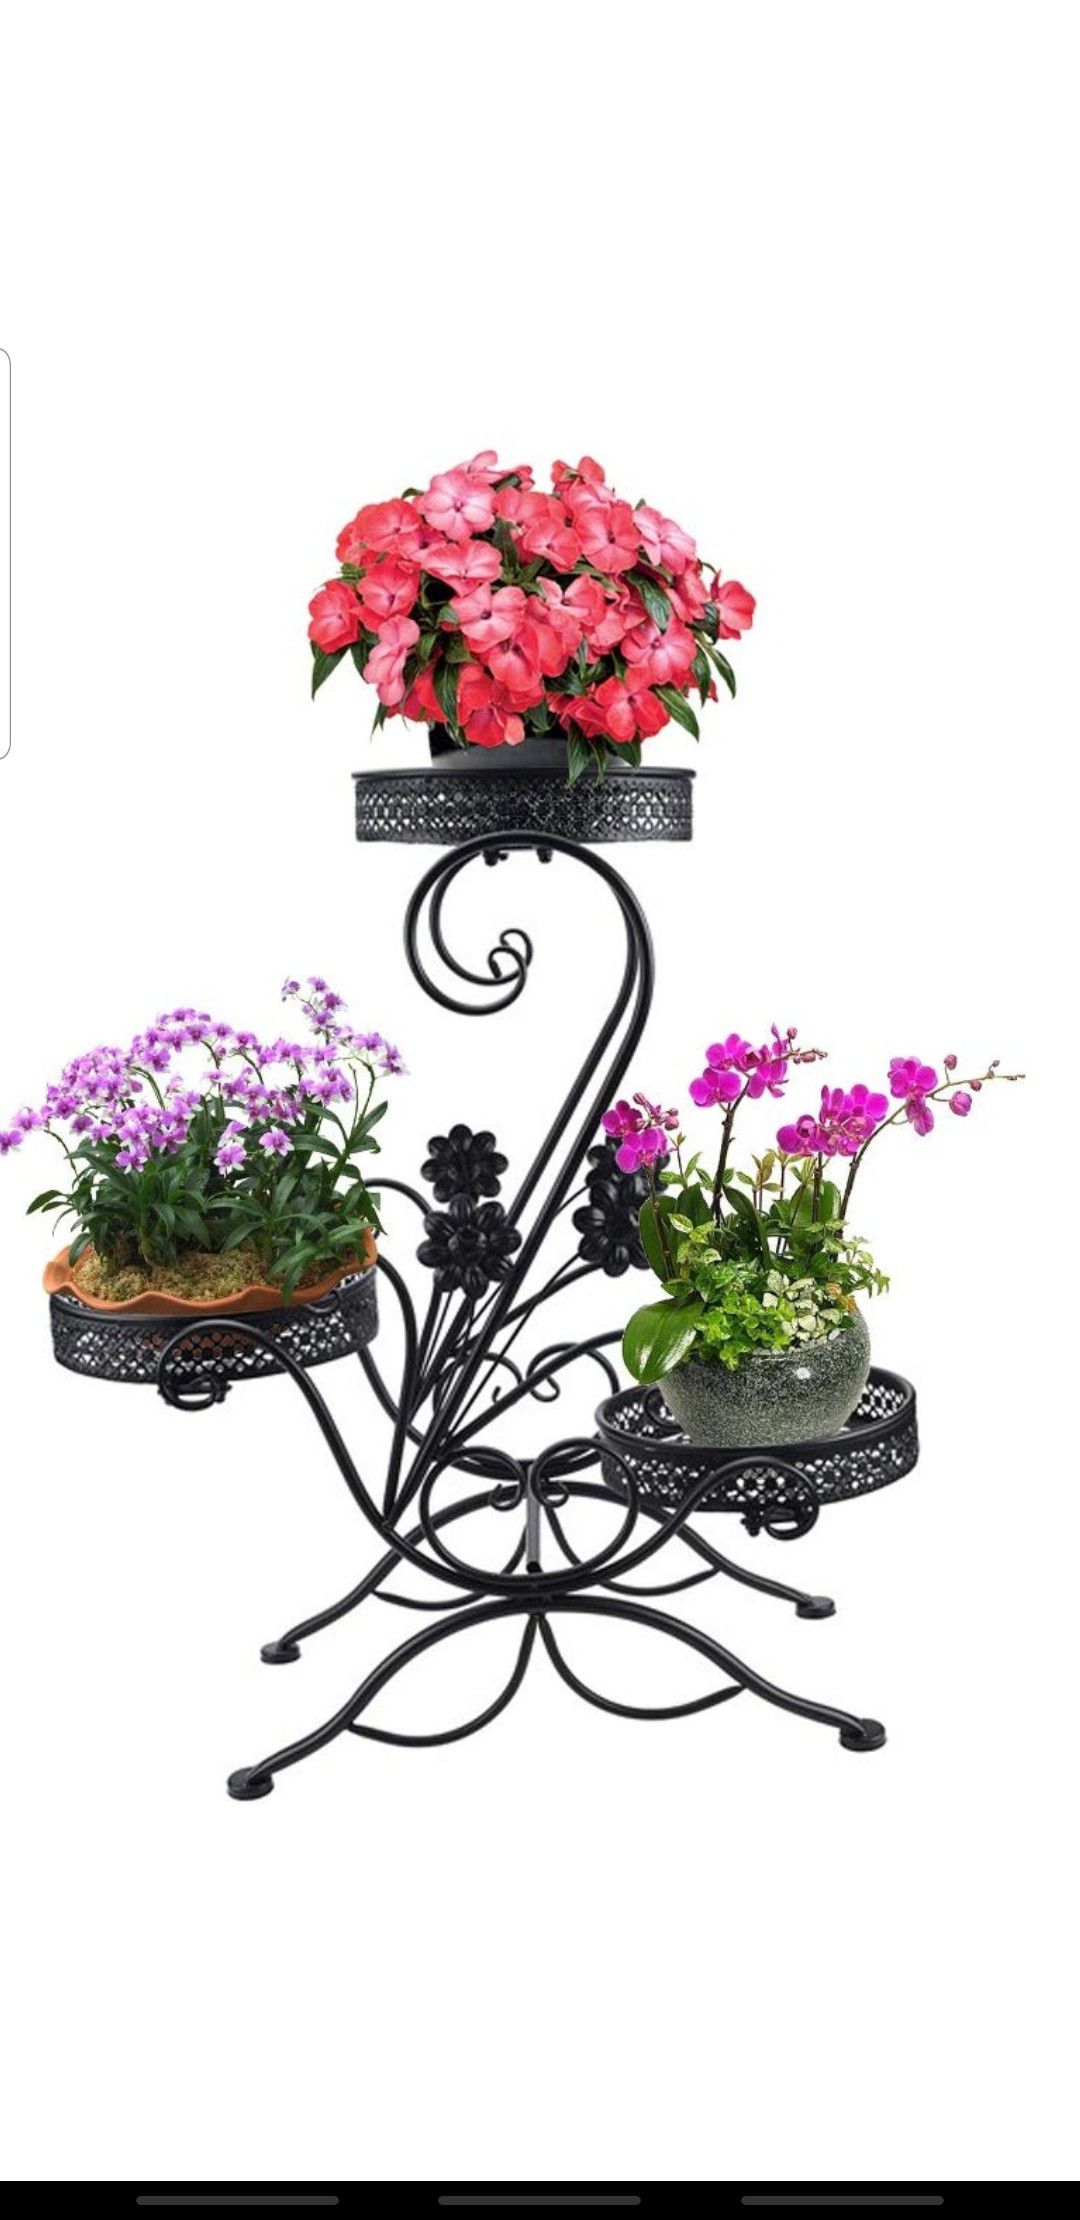 unho Plant Stand Flower Pot Shelf Indoor 3 Tier Iron Stand Outdoor Displaying Plant Holder for Garden Patio Decors,